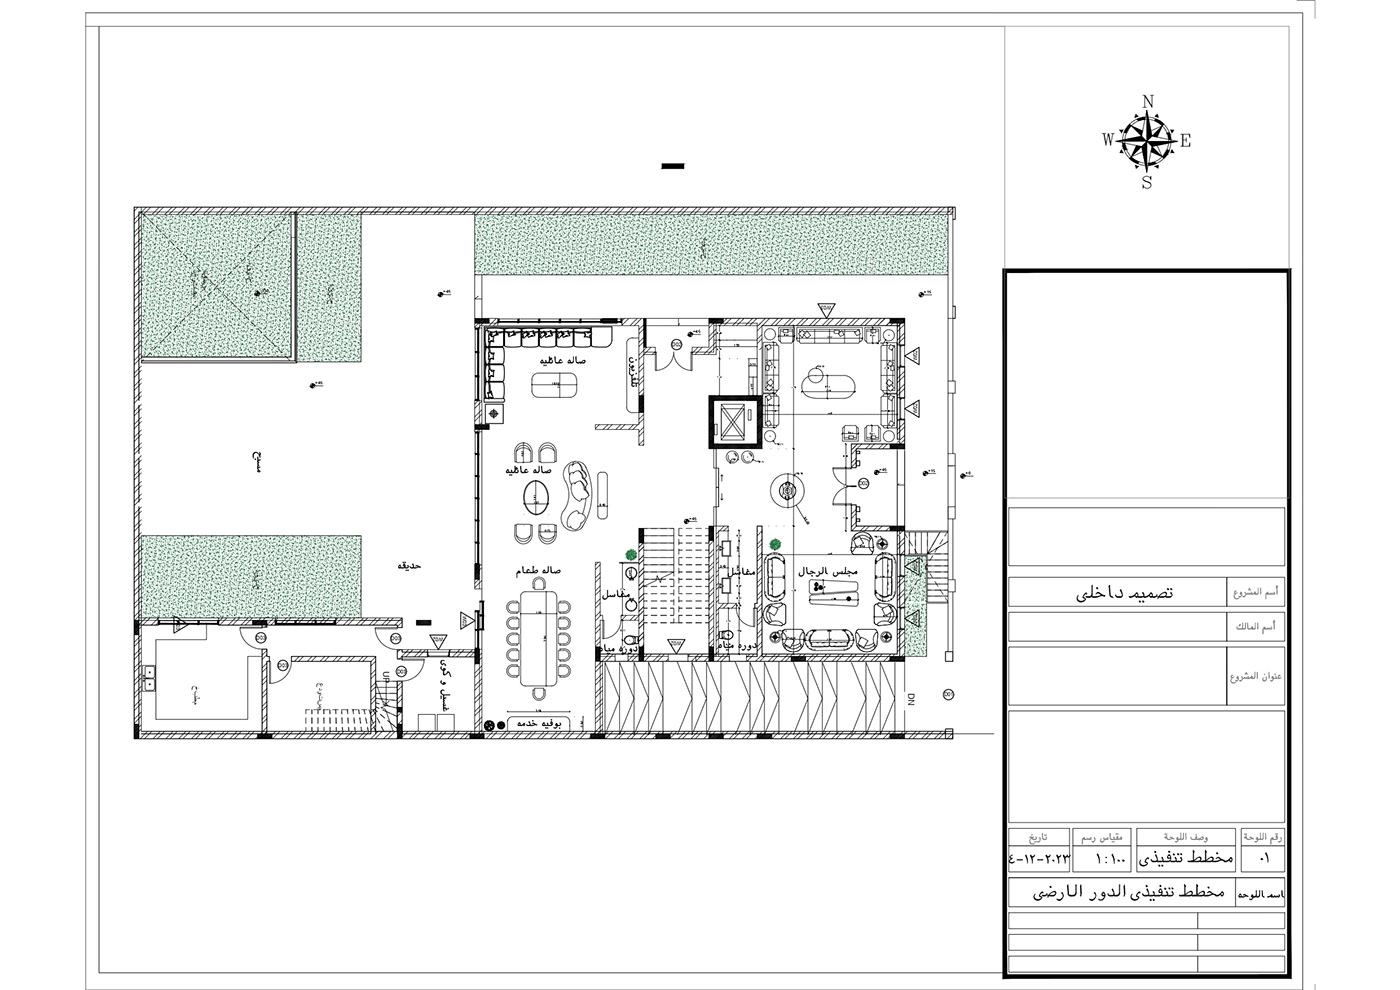 shop drawing architecture interior design  technical drawing AutoCAD